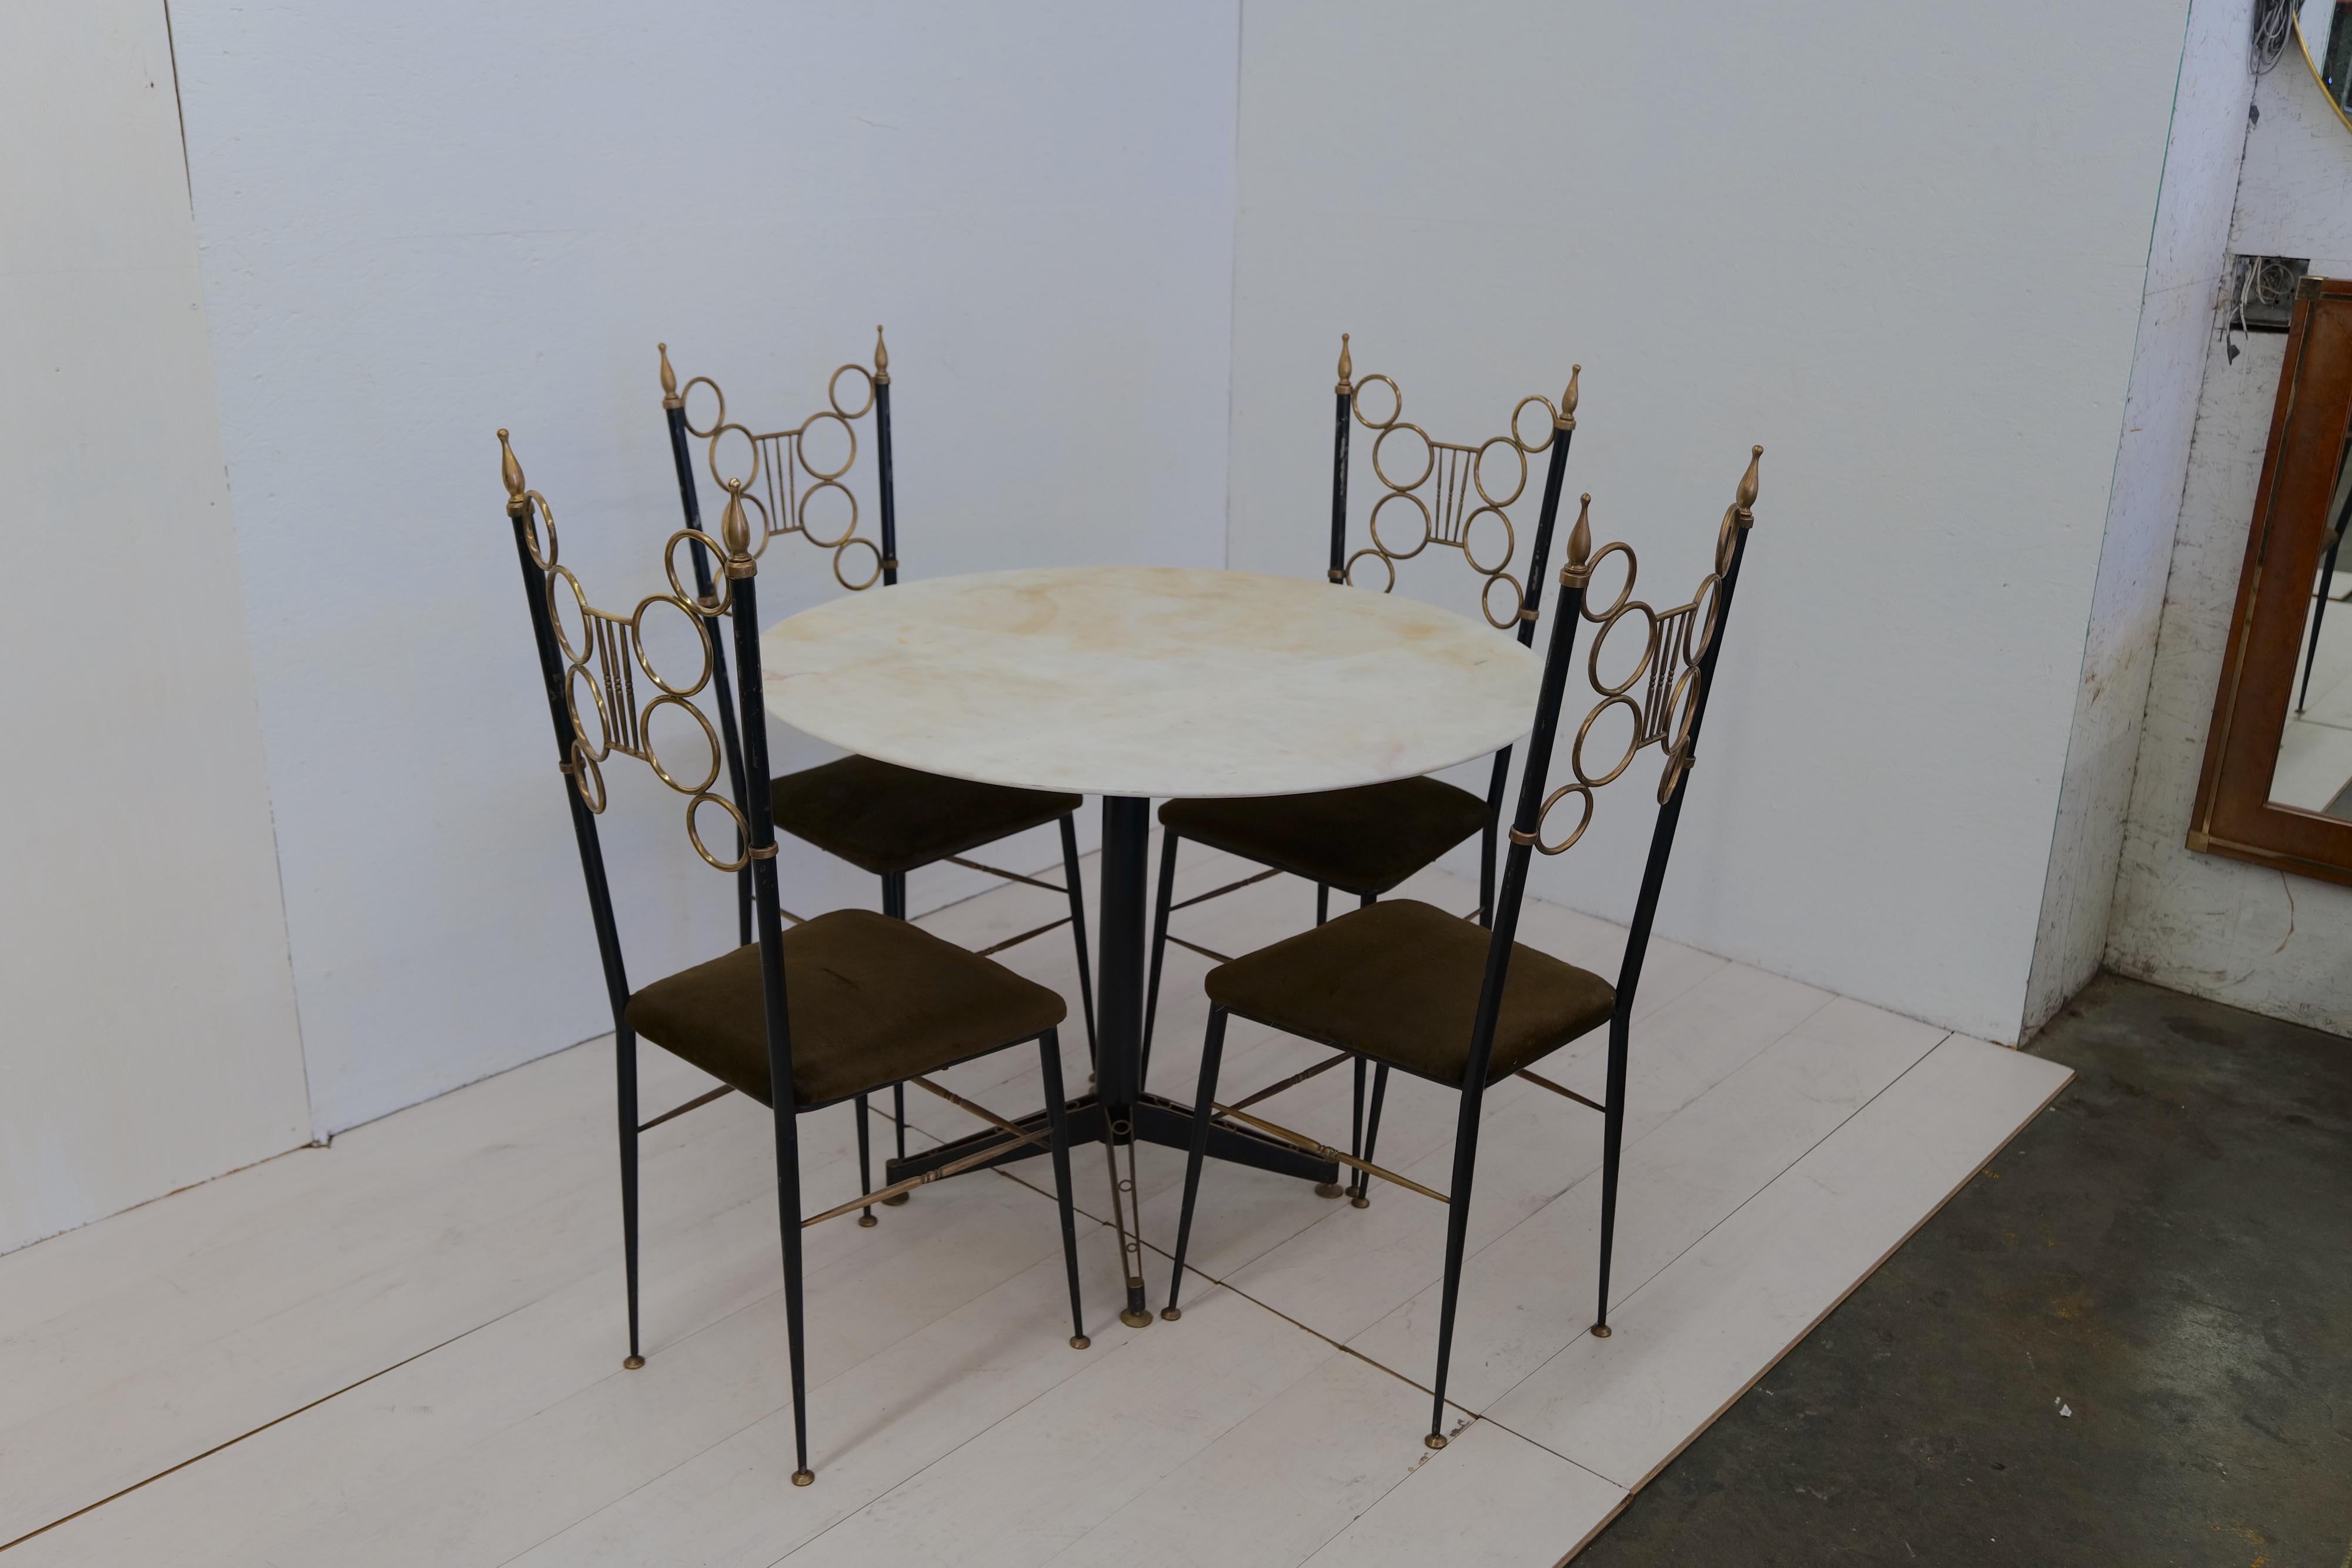 Midcentury Italian Set of 4 Chairs and Marble Table, 1980s For Sale 3